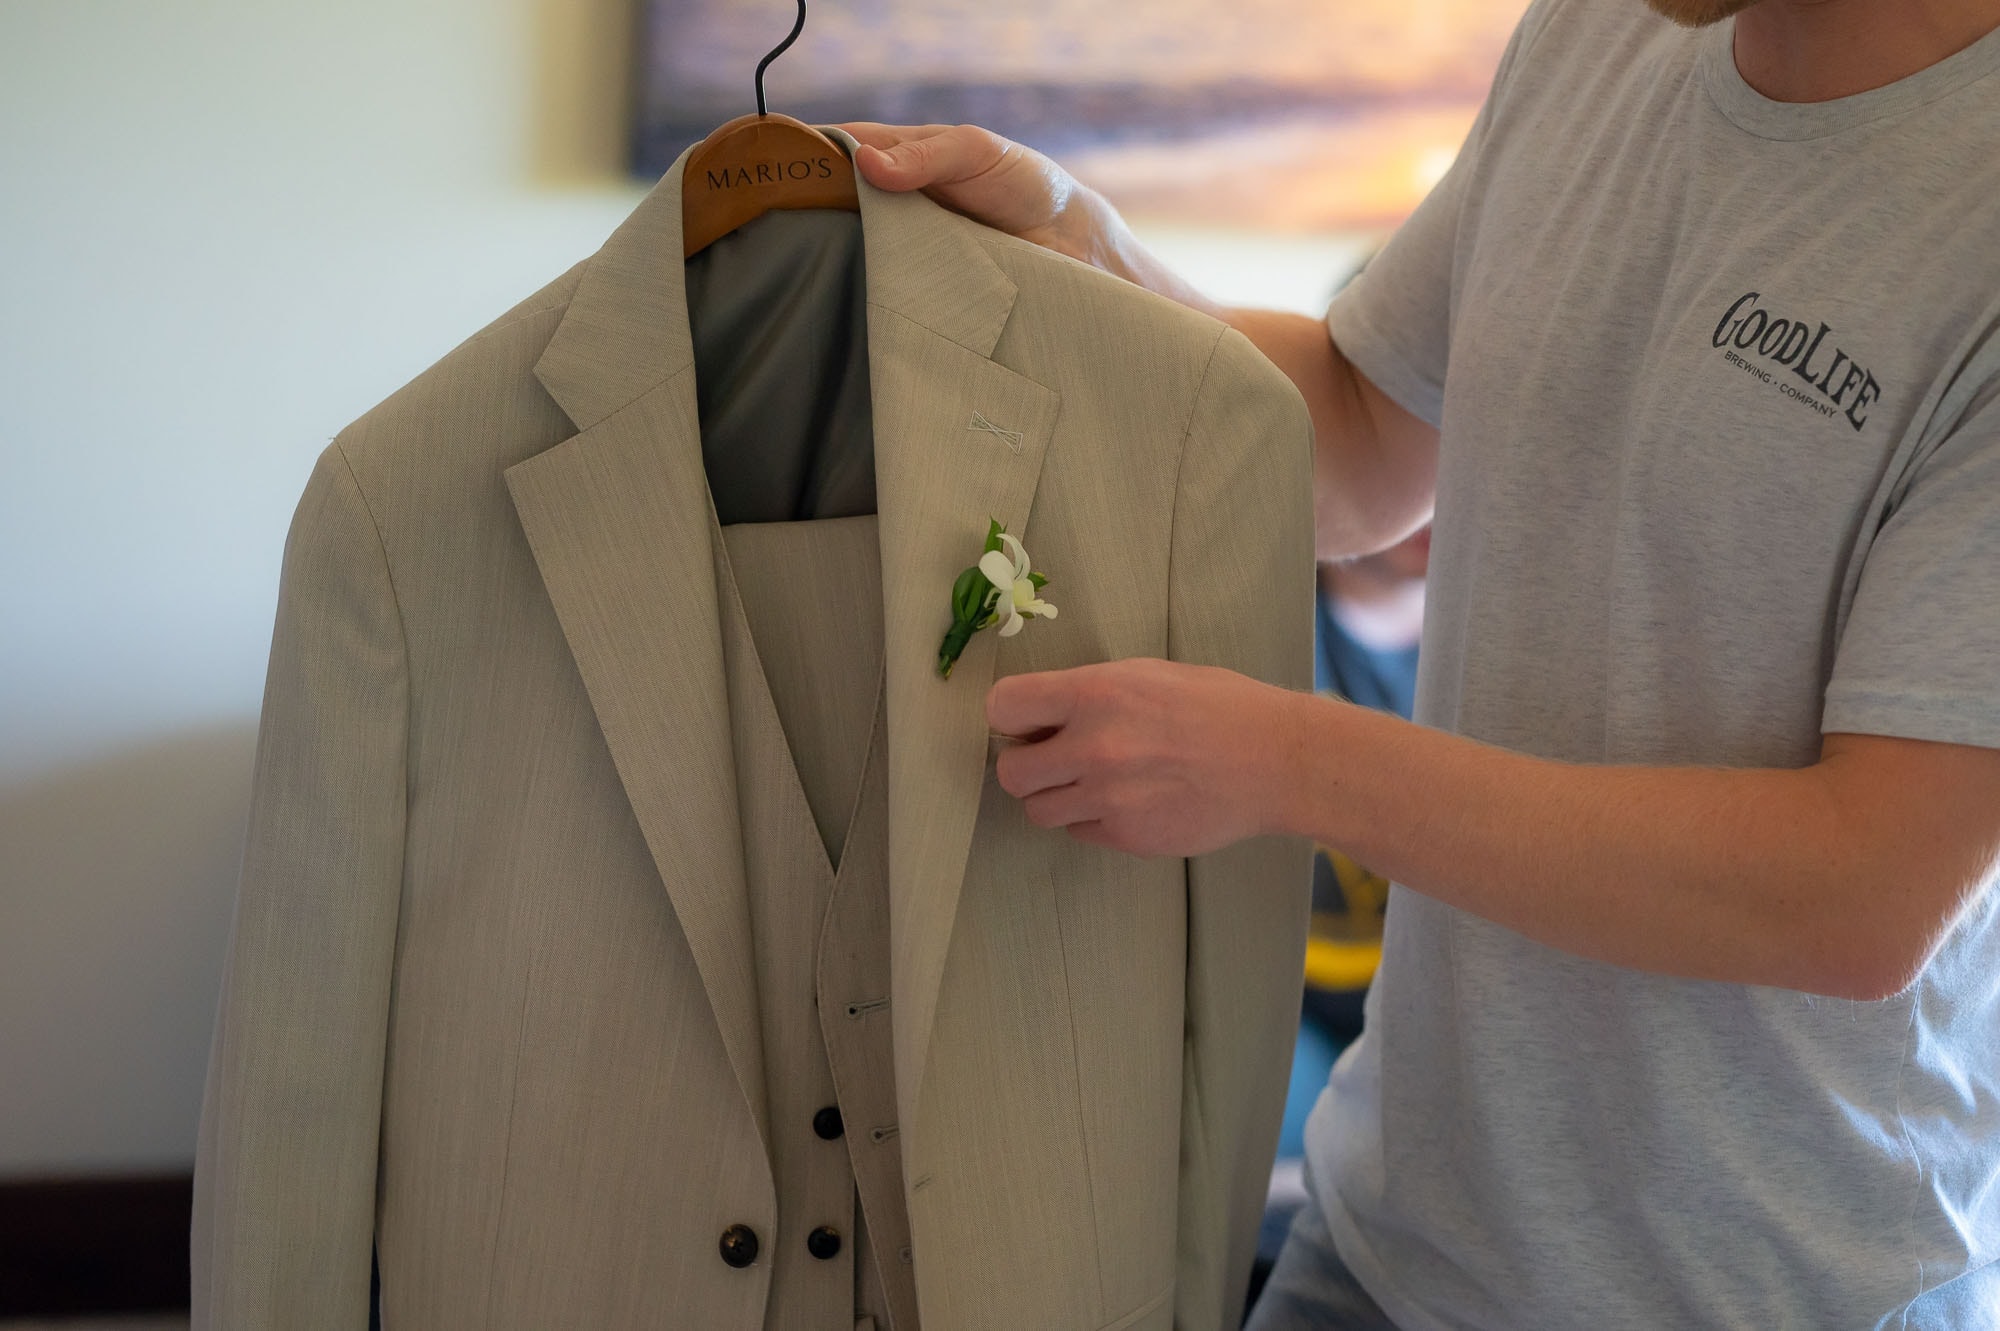 the groom prepping his suit